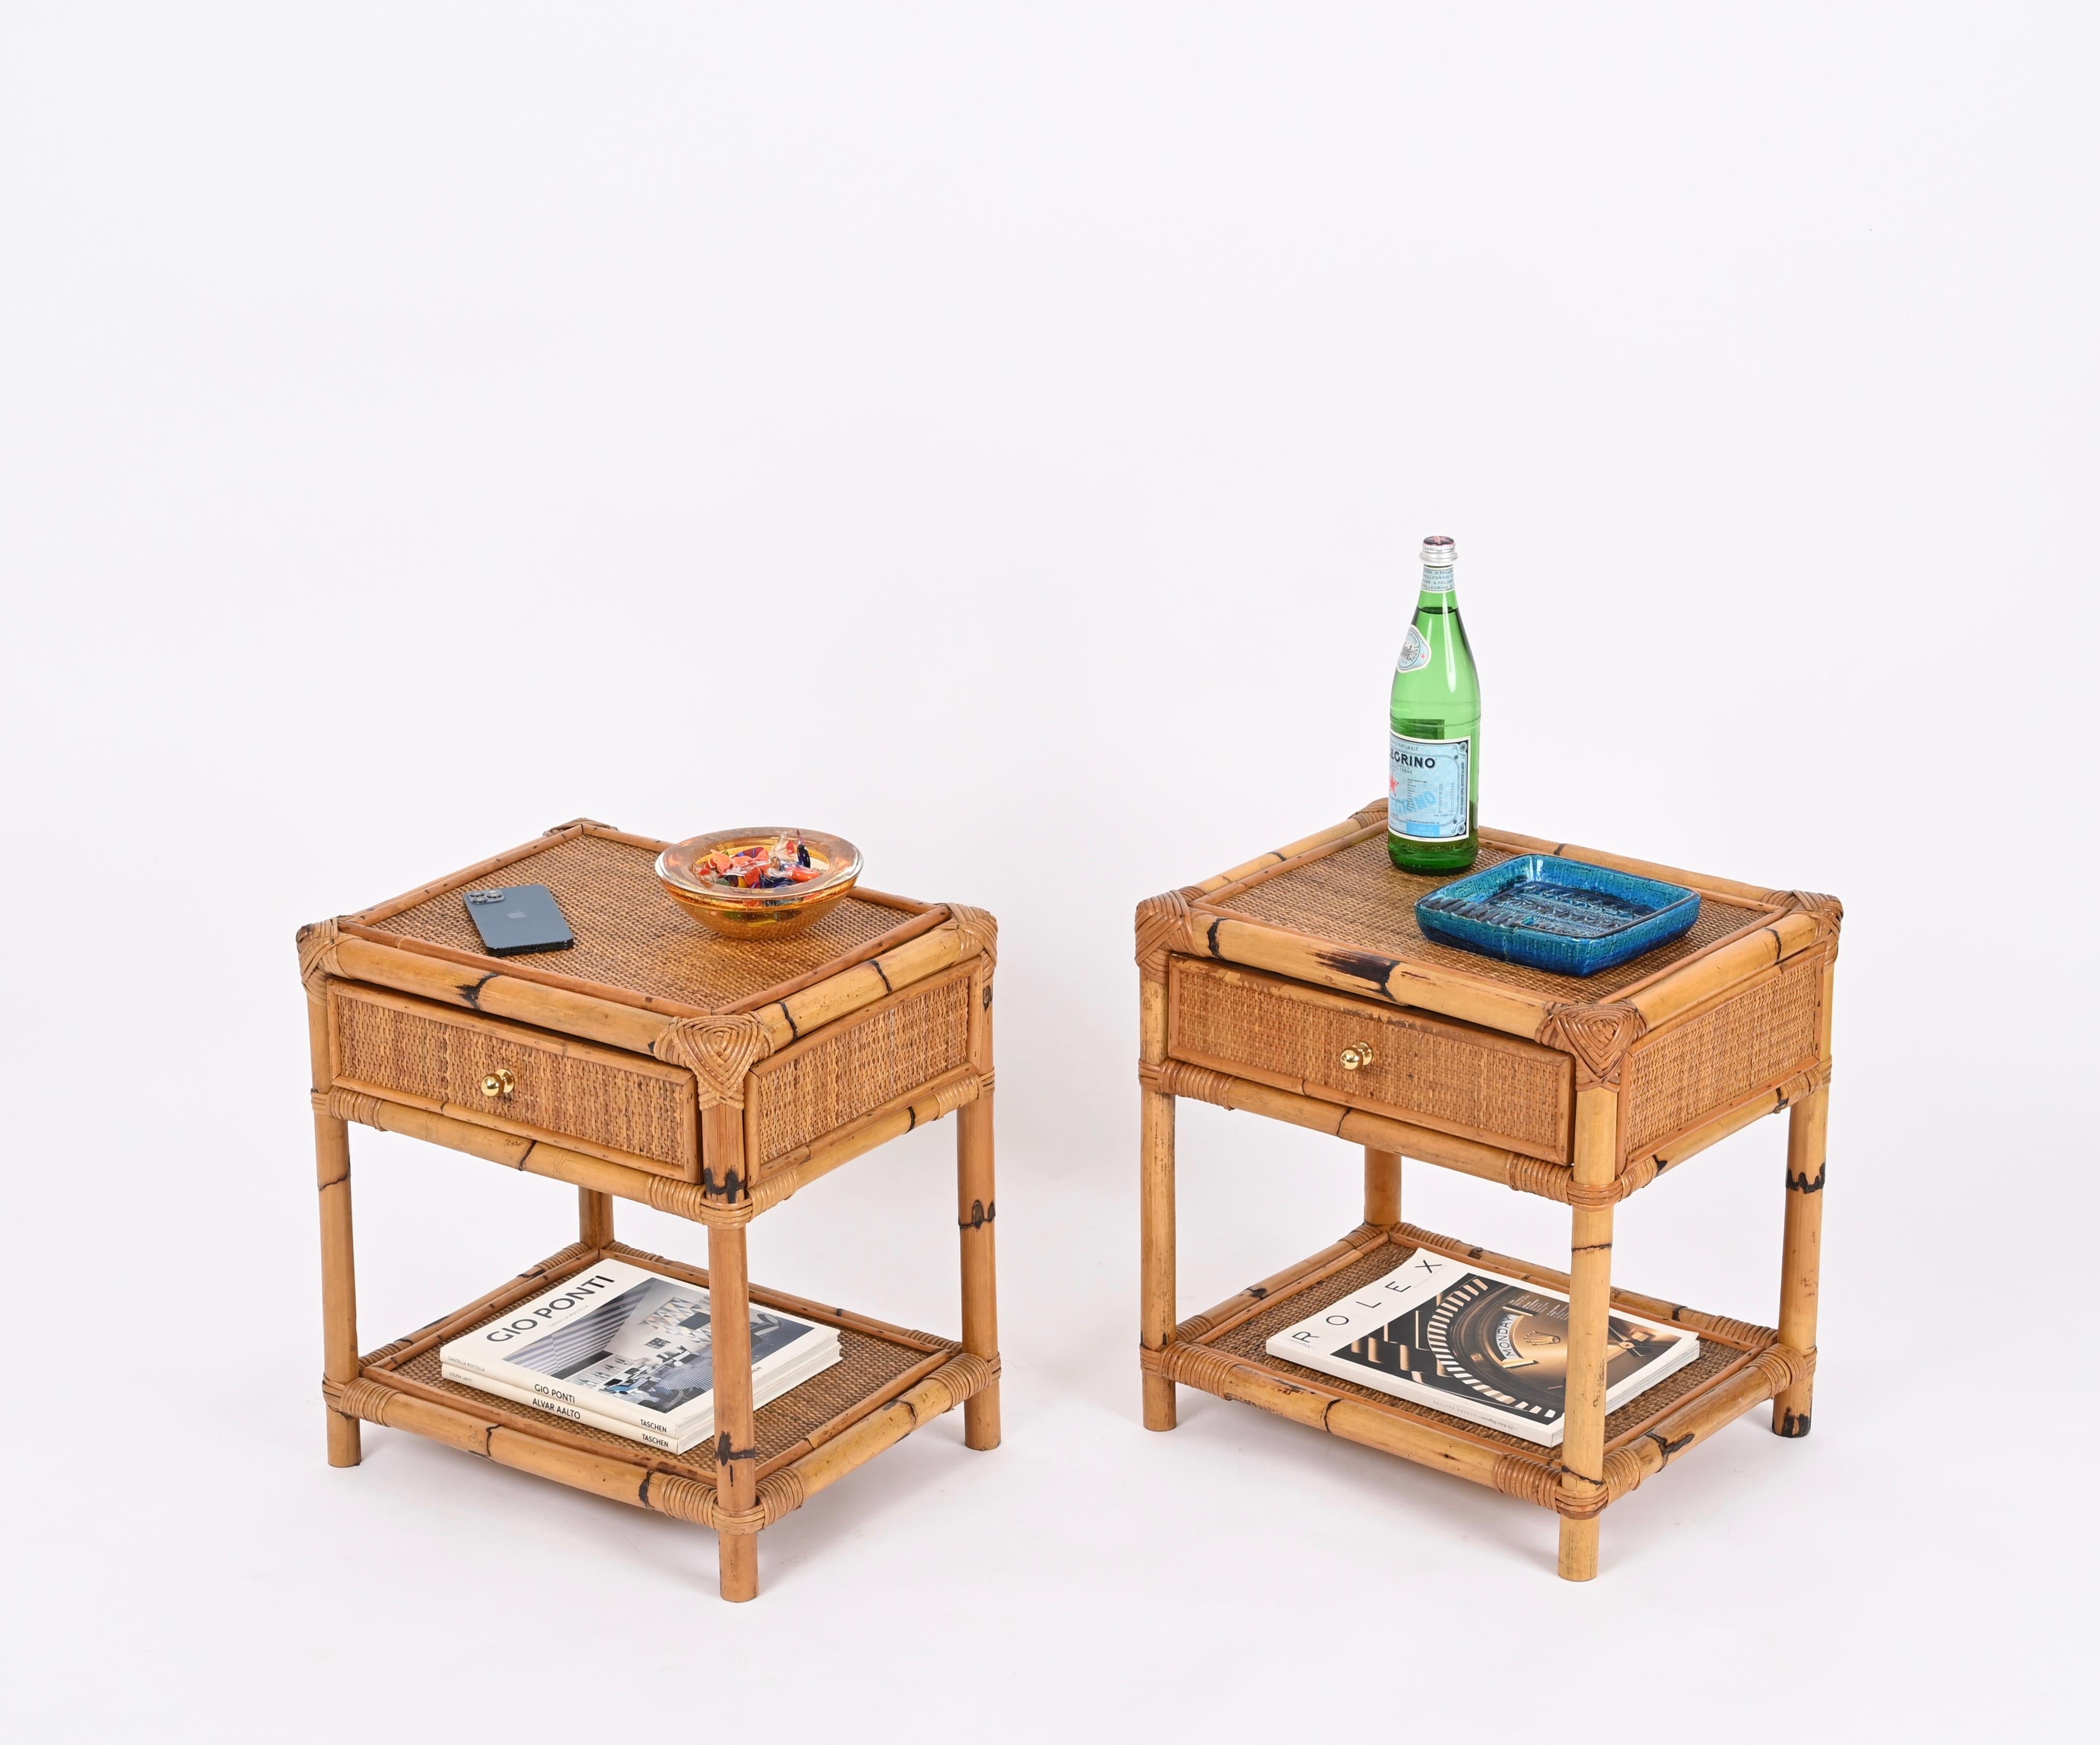 Fantastic pair of Mid-Century nightstands in bamboo, hand-woven rattan wicker and brass handles. These lovely bedside tables were designed in Italy during the 1970s.

These charming nightstands are fully made in bamboo canes and enriched all around